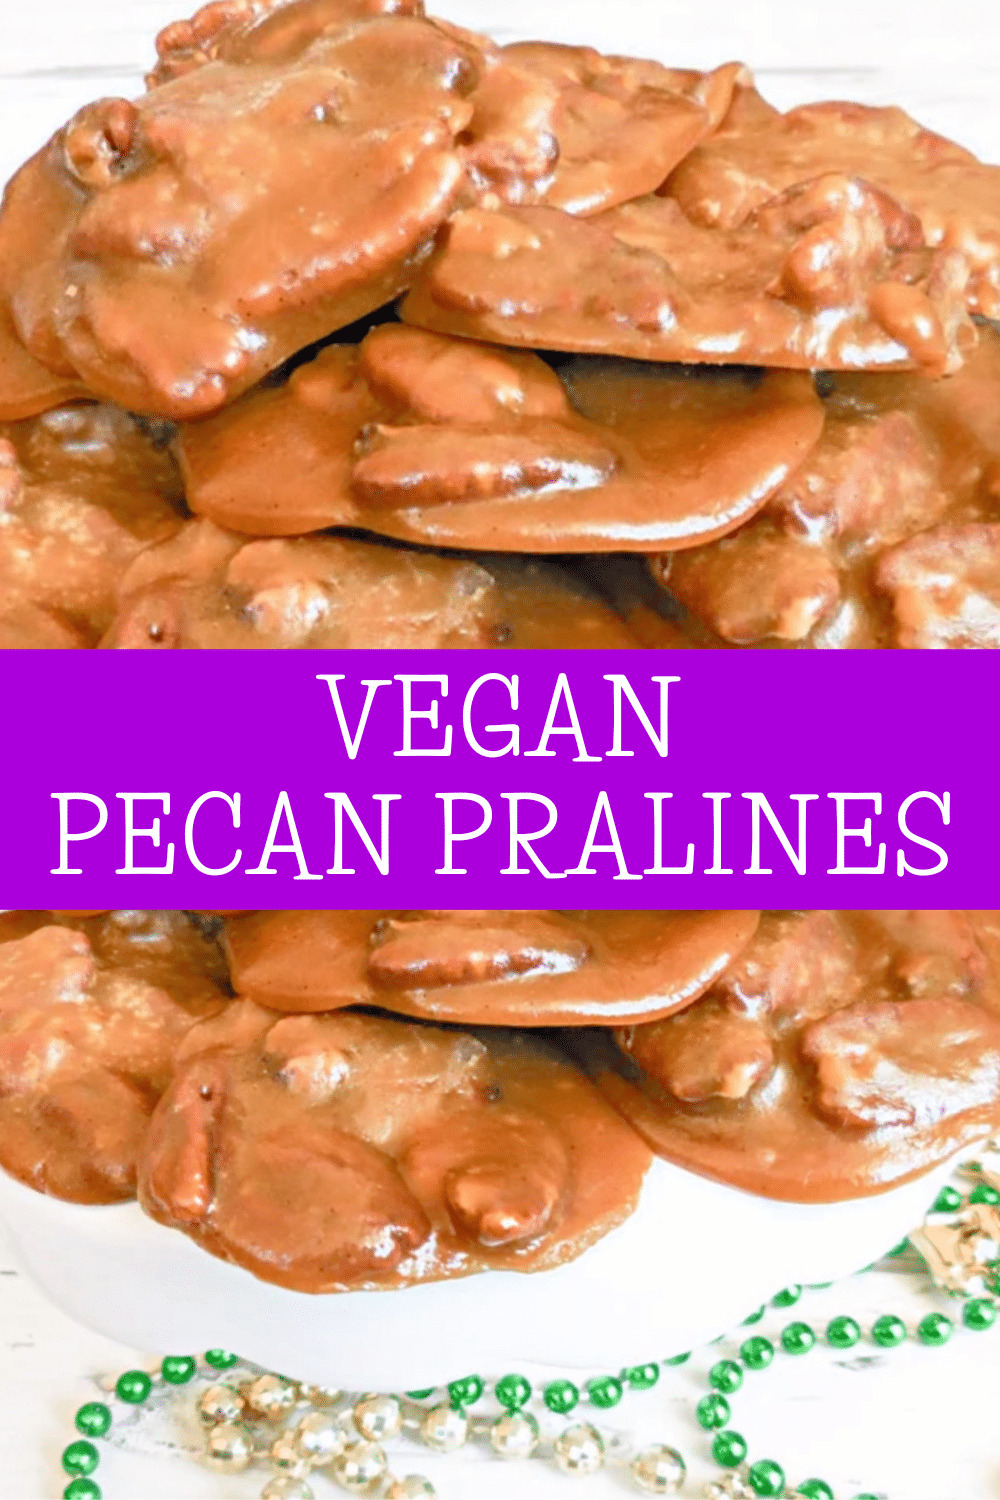 Vegan Pecan Pralines ~ These sweet and chewy, pecan-studded confections are easy to make with simple ingredients. via @thiswifecooks